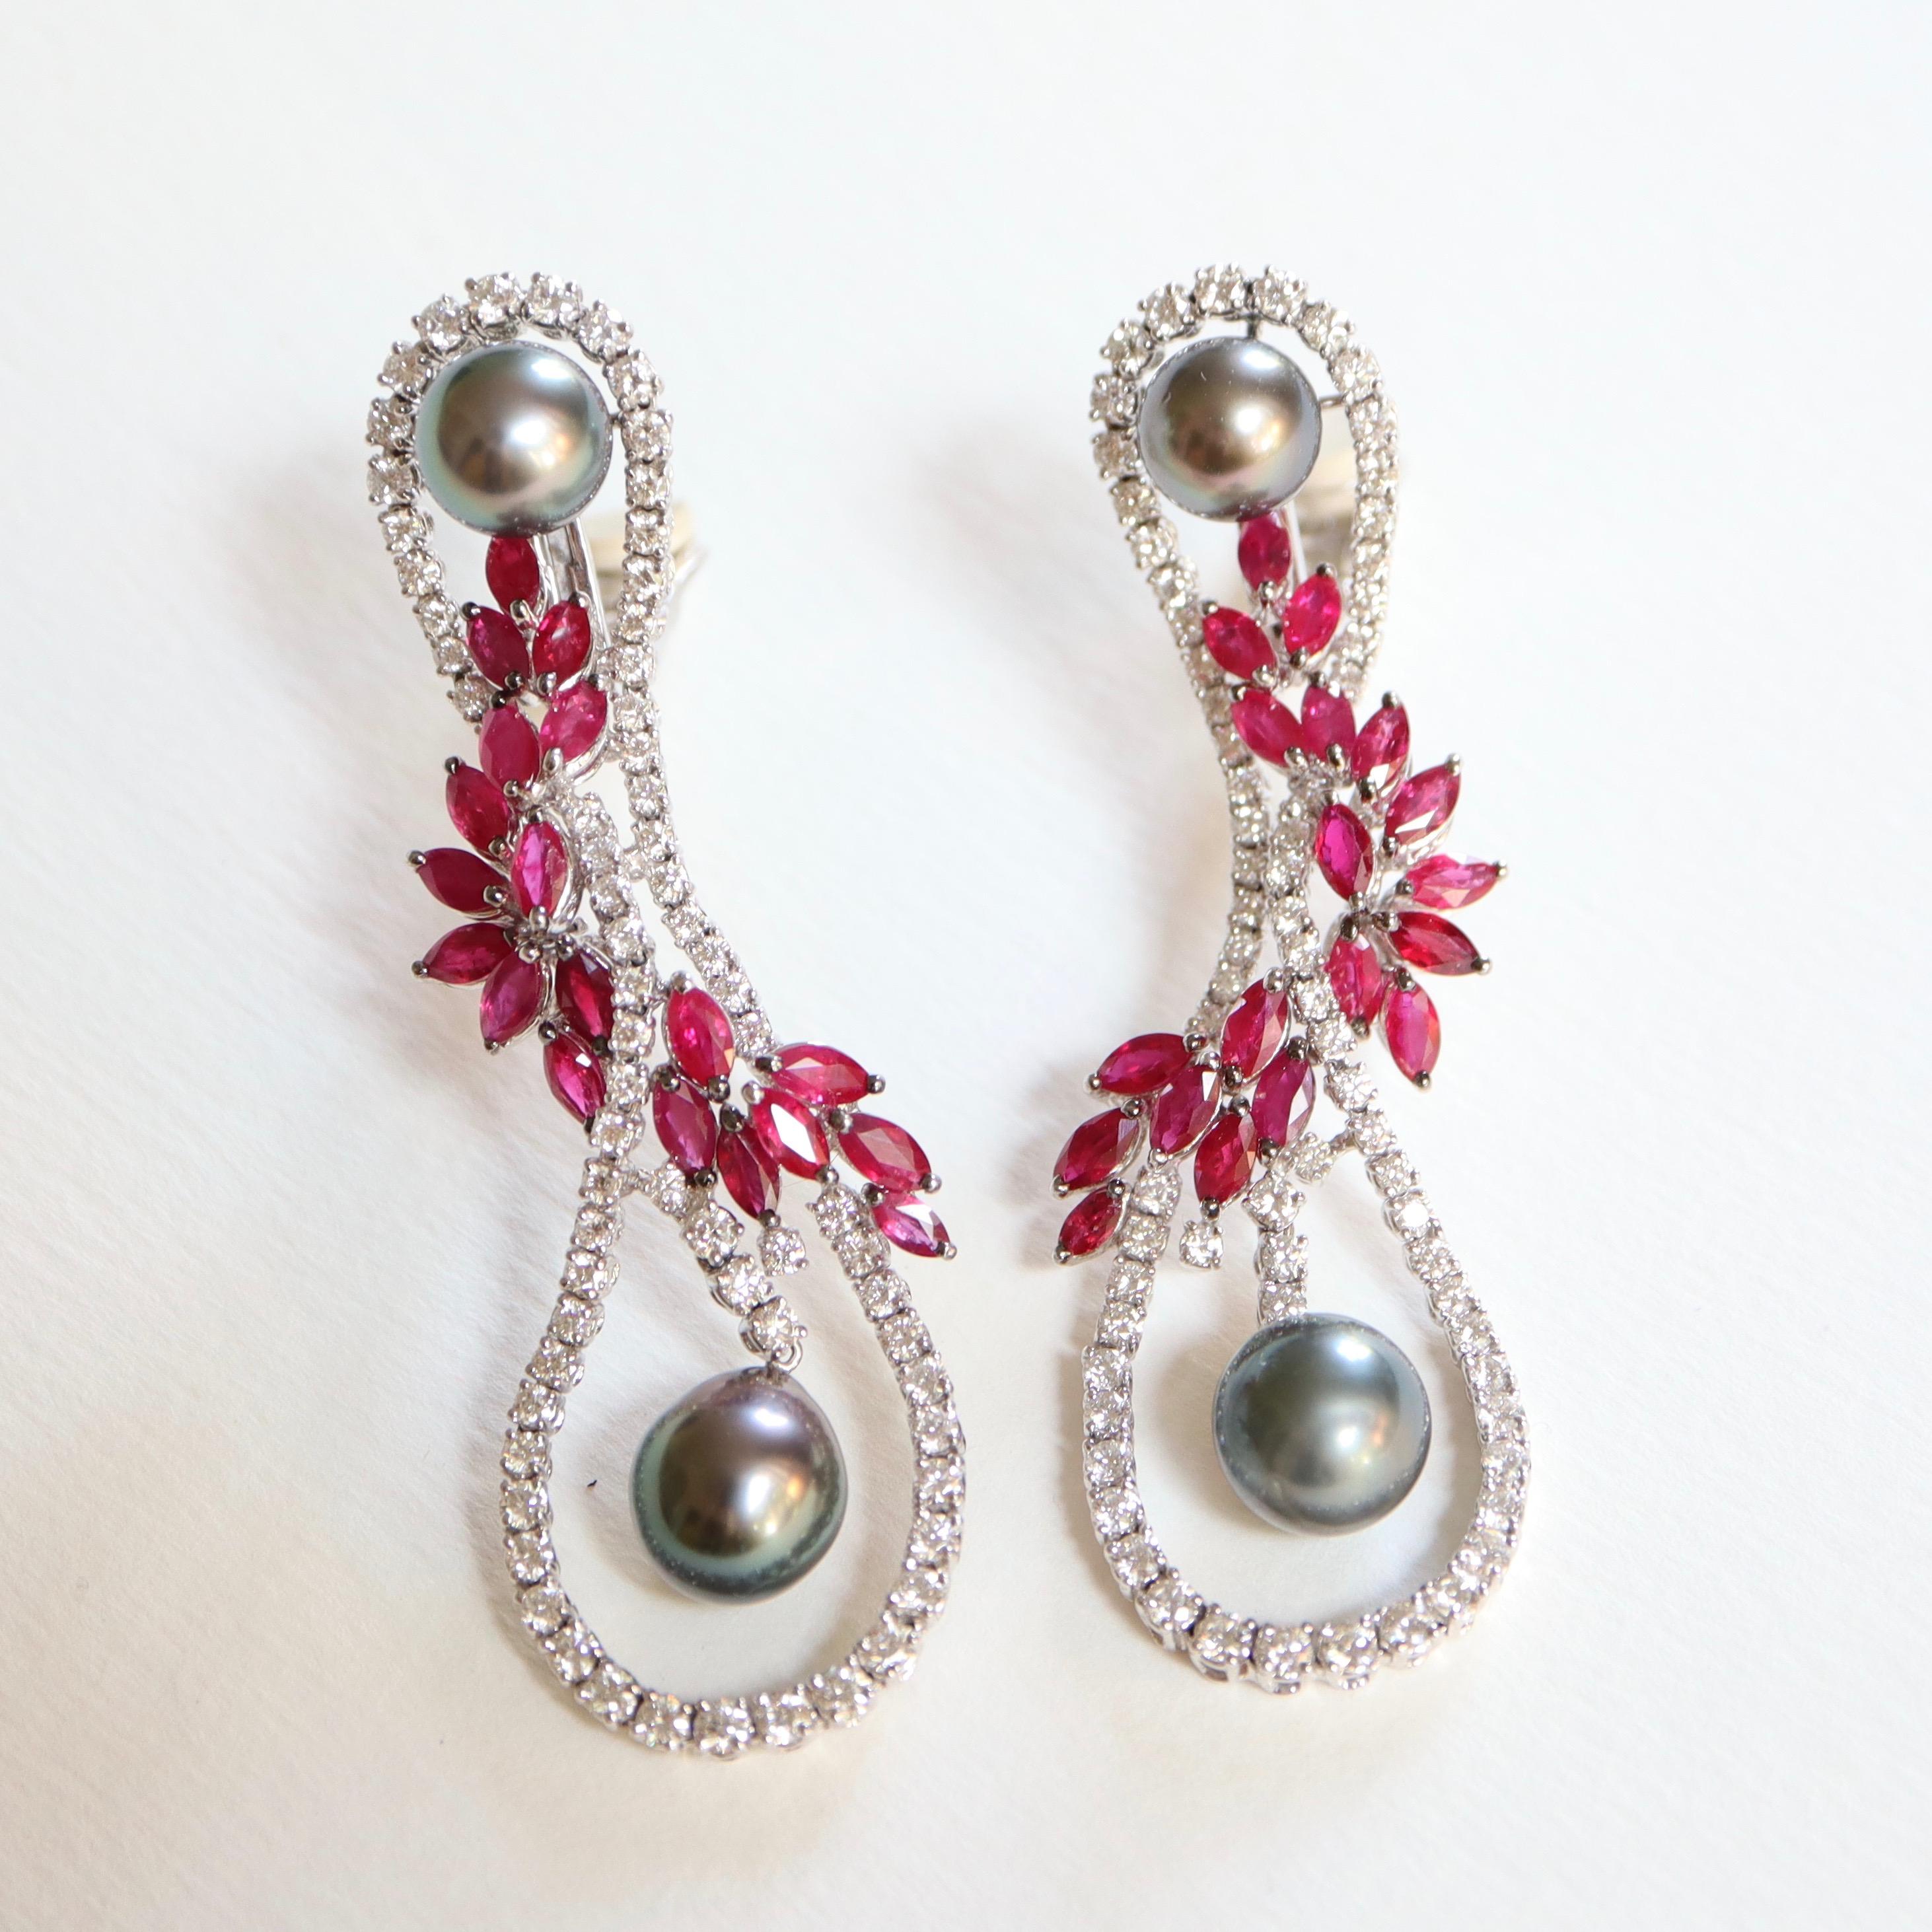 MOUAWAD Dangle Earrings Pattern representing a 8 in 18 carat white Gold entirely set with Brilliant Cut Diamonds, intertwined with Shuttle-cut Rubies forming a foliage Garland. A Grey Tahitian Pearl in the Center at the Top of the Earrings as well